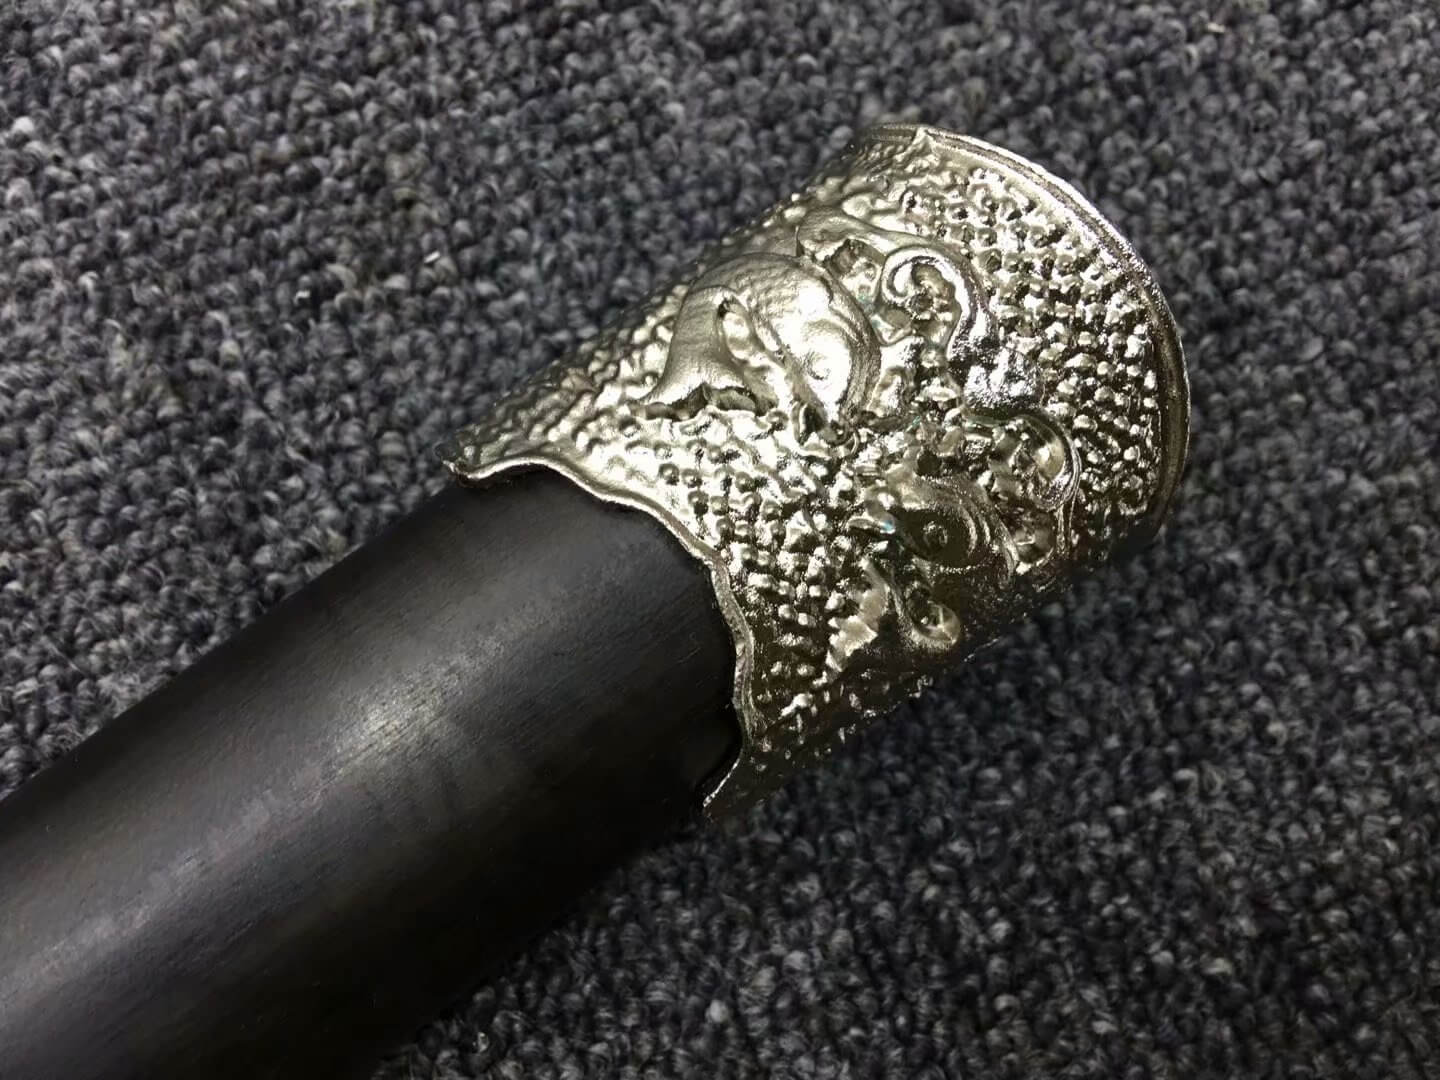 Longquan sword,High carbon steel etch blade,Black wood,Alloy fittings - Chinese sword shop